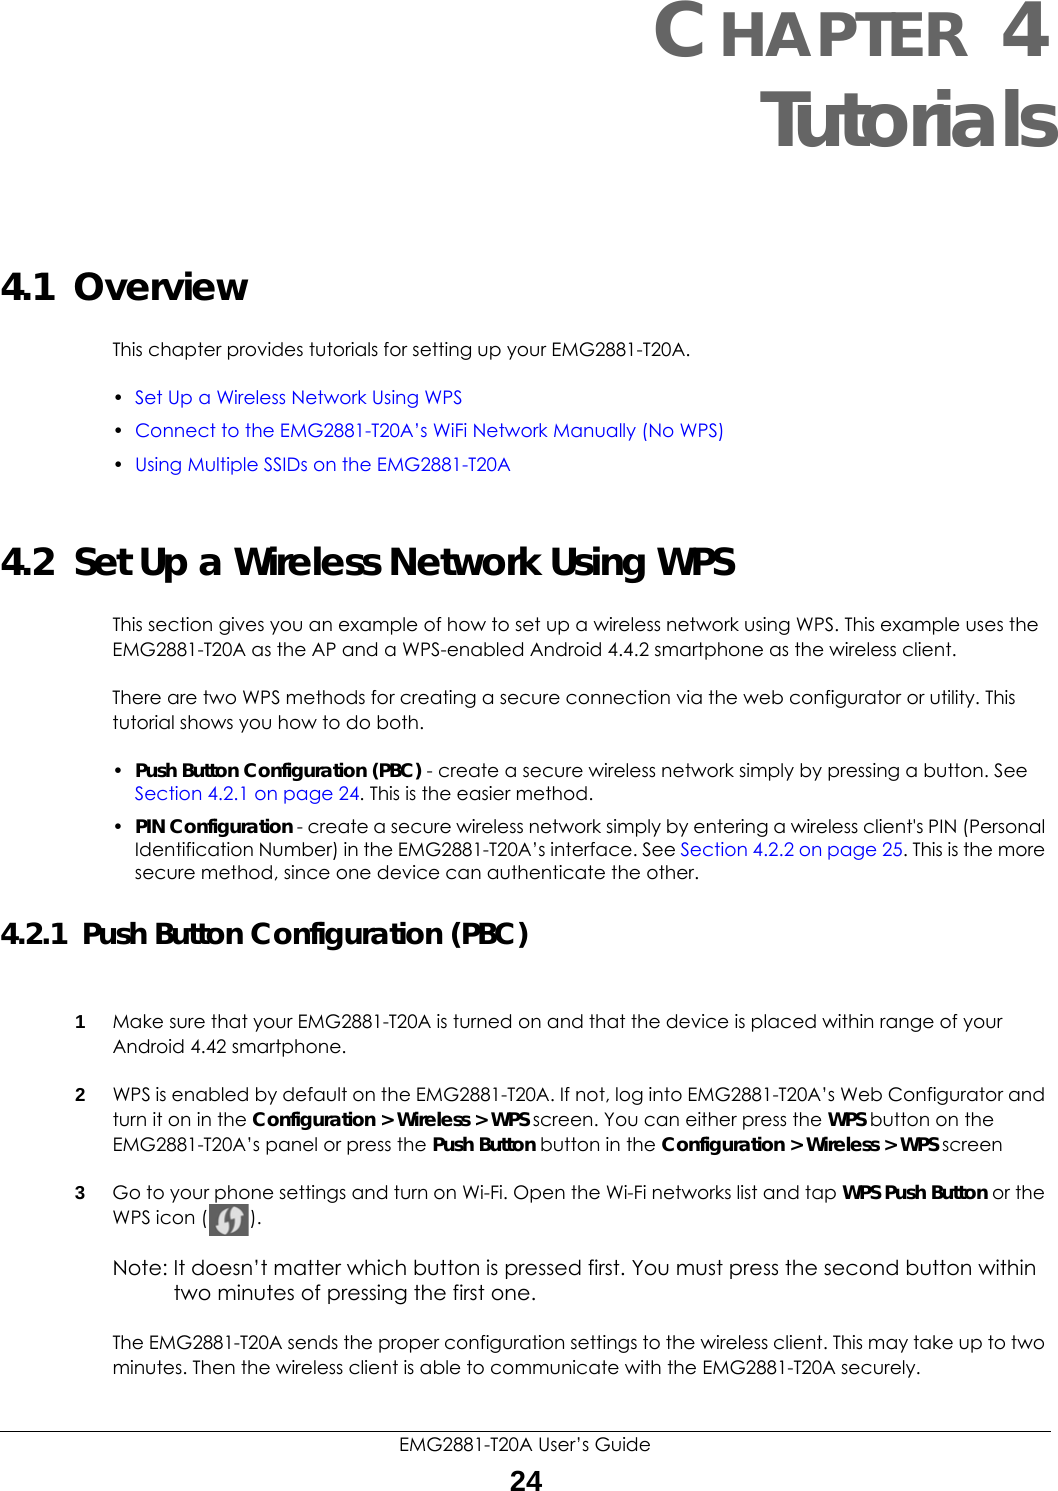 EMG2881-T20A User’s Guide24CHAPTER 4Tutorials4.1  OverviewThis chapter provides tutorials for setting up your EMG2881-T20A.•Set Up a Wireless Network Using WPS•Connect to the EMG2881-T20A’s WiFi Network Manually (No WPS)•Using Multiple SSIDs on the EMG2881-T20A4.2  Set Up a Wireless Network Using WPSThis section gives you an example of how to set up a wireless network using WPS. This example uses the EMG2881-T20A as the AP and a WPS-enabled Android 4.4.2 smartphone as the wireless client. There are two WPS methods for creating a secure connection via the web configurator or utility. This tutorial shows you how to do both.•Push Button Configuration (PBC) - create a secure wireless network simply by pressing a button. See Section 4.2.1 on page 24. This is the easier method.•PIN Configuration - create a secure wireless network simply by entering a wireless client&apos;s PIN (Personal Identification Number) in the EMG2881-T20A’s interface. See Section 4.2.2 on page 25. This is the more secure method, since one device can authenticate the other.4.2.1  Push Button Configuration (PBC)1Make sure that your EMG2881-T20A is turned on and that the device is placed within range of your Android 4.42 smartphone. 2WPS is enabled by default on the EMG2881-T20A. If not, log into EMG2881-T20A’s Web Configurator and turn it on in the Configuration &gt; Wireless &gt; WPS screen. You can either press the WPS button on the EMG2881-T20A’s panel or press the Push Button button in the Configuration &gt; Wireless &gt; WPS screen3Go to your phone settings and turn on Wi-Fi. Open the Wi-Fi networks list and tap WPS Push Button or the WPS icon ( ). Note: It doesn’t matter which button is pressed first. You must press the second button within two minutes of pressing the first one. The EMG2881-T20A sends the proper configuration settings to the wireless client. This may take up to two minutes. Then the wireless client is able to communicate with the EMG2881-T20A securely. 